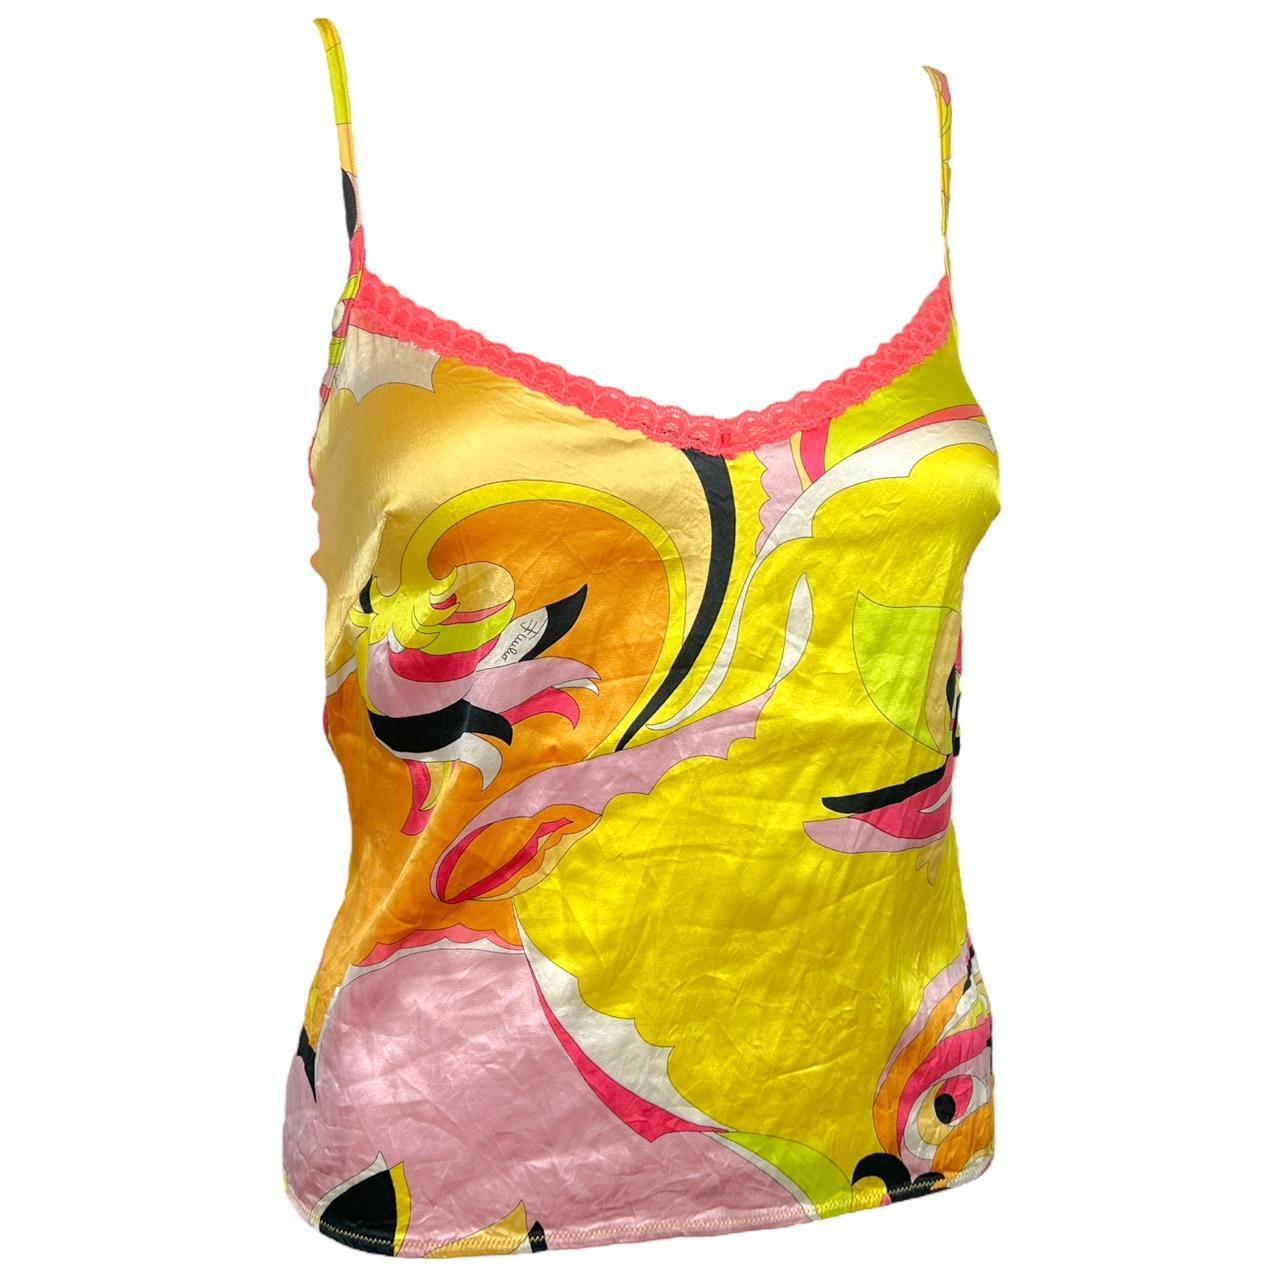 Emilio Pucci Women's Pink and Yellow Vest